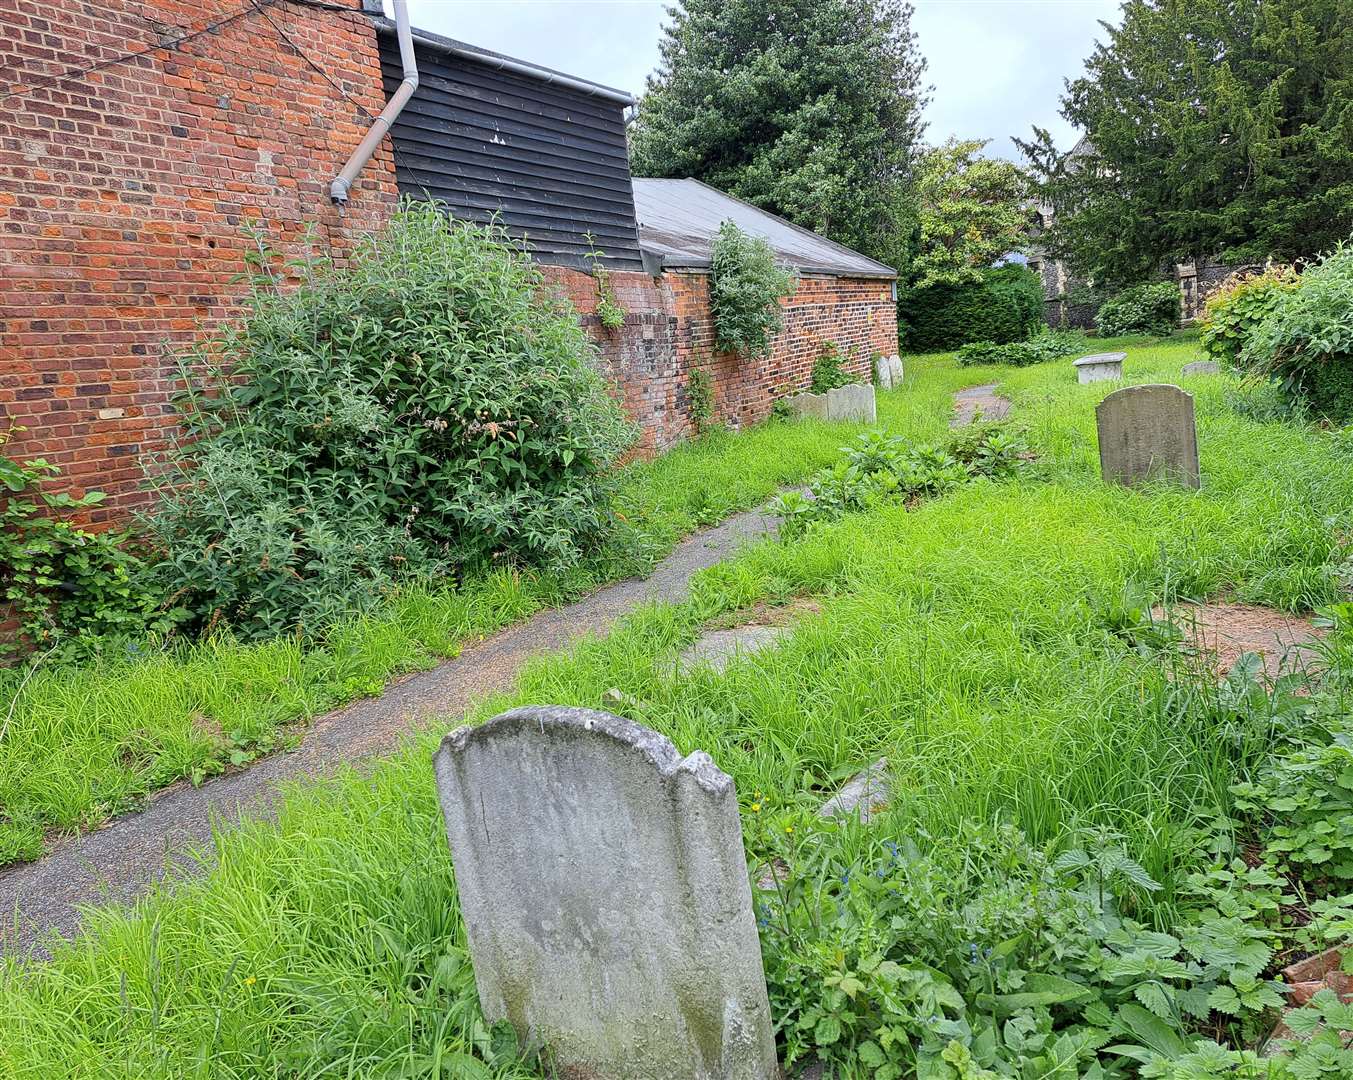 The church has established that any works done in St Margaret’s churchyard will not involve the distrubance of human remains